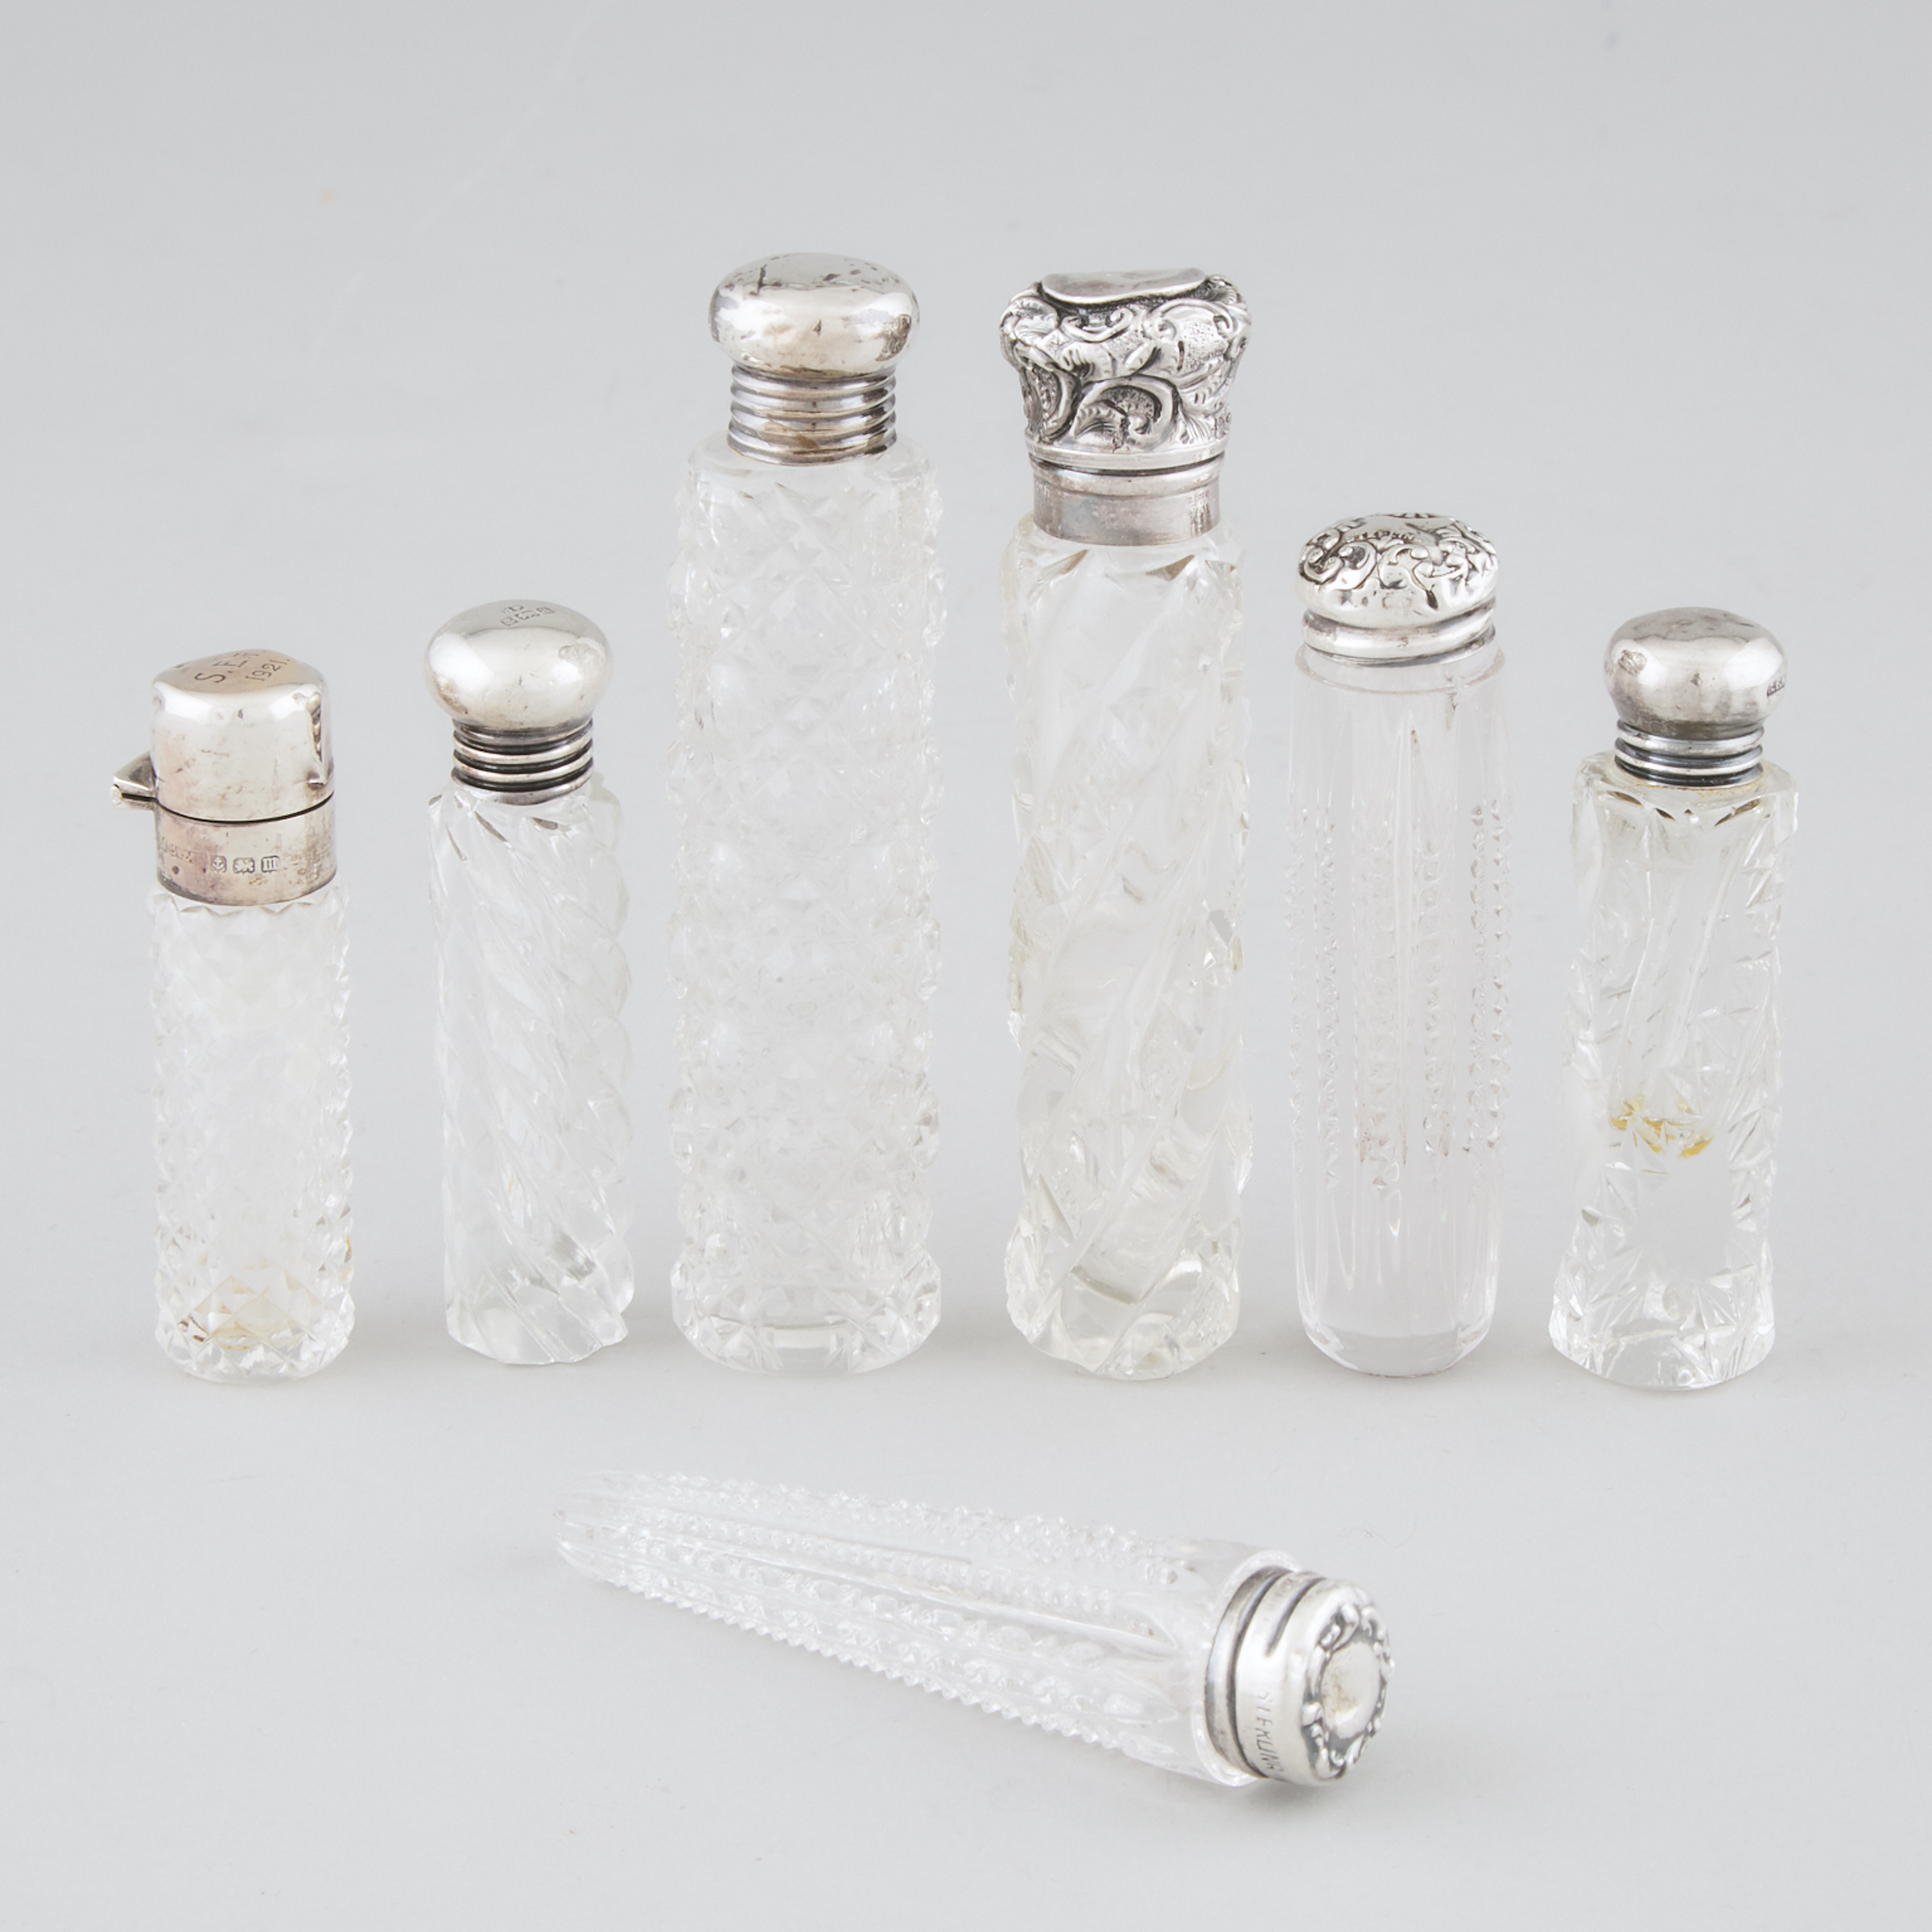 Seven English and North American Silver Mounted Cut Glass Perfume Bottles and Phials, late 19th/early 20th century